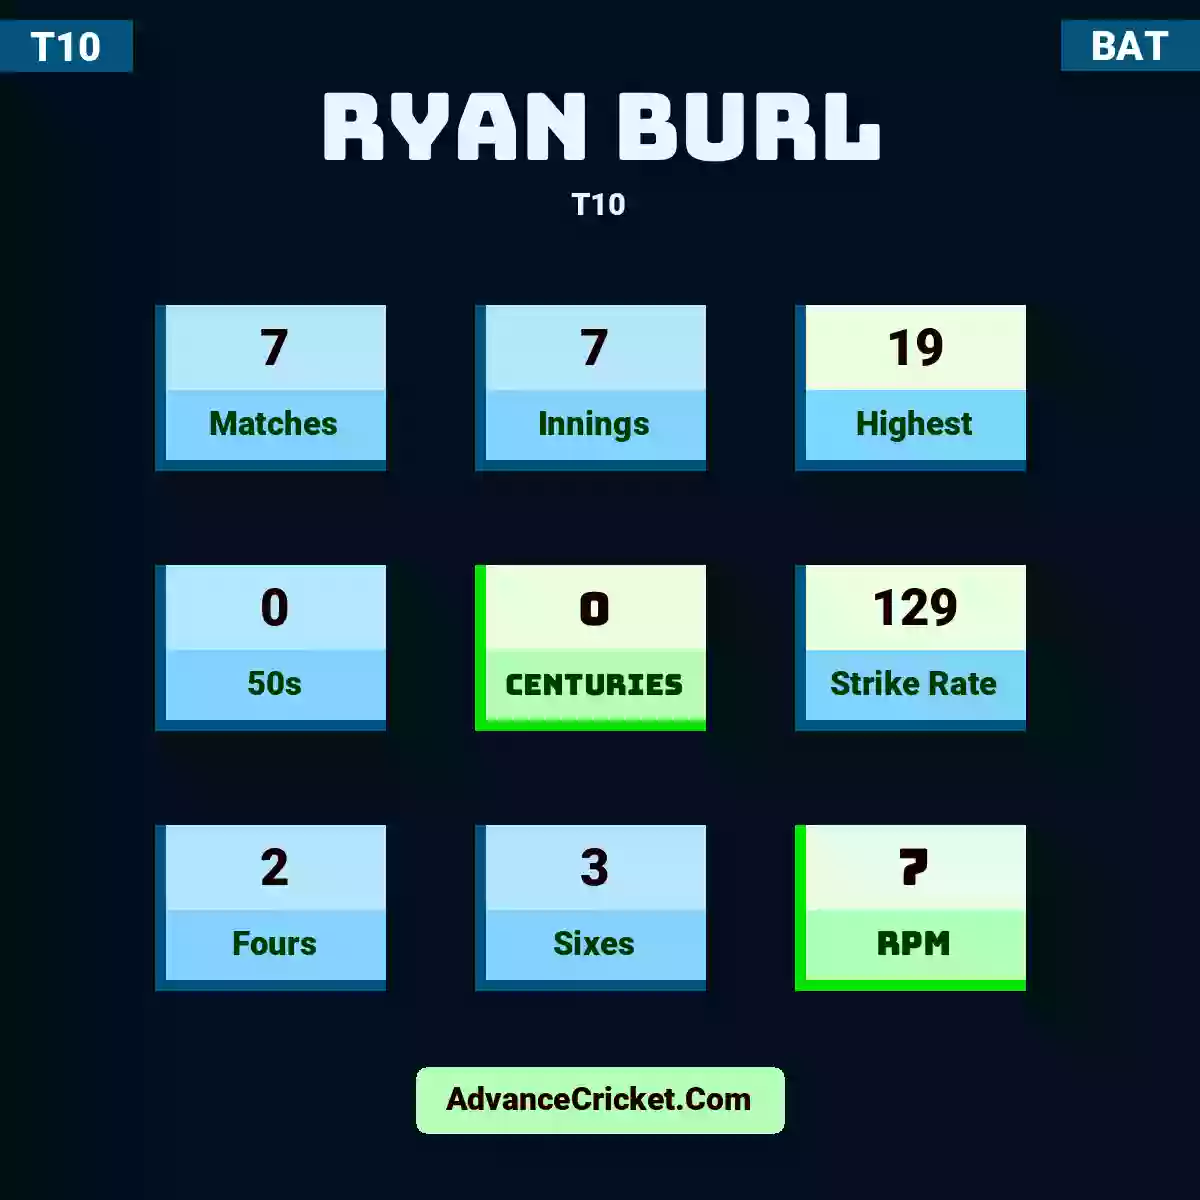 Ryan Burl T10 , Ryan Burl played 7 matches, scored 19 runs as highest, 0 half-centuries, and 0 centuries, with a strike rate of 129. R.Burl hit 2 fours and 3 sixes, with an RPM of 7.